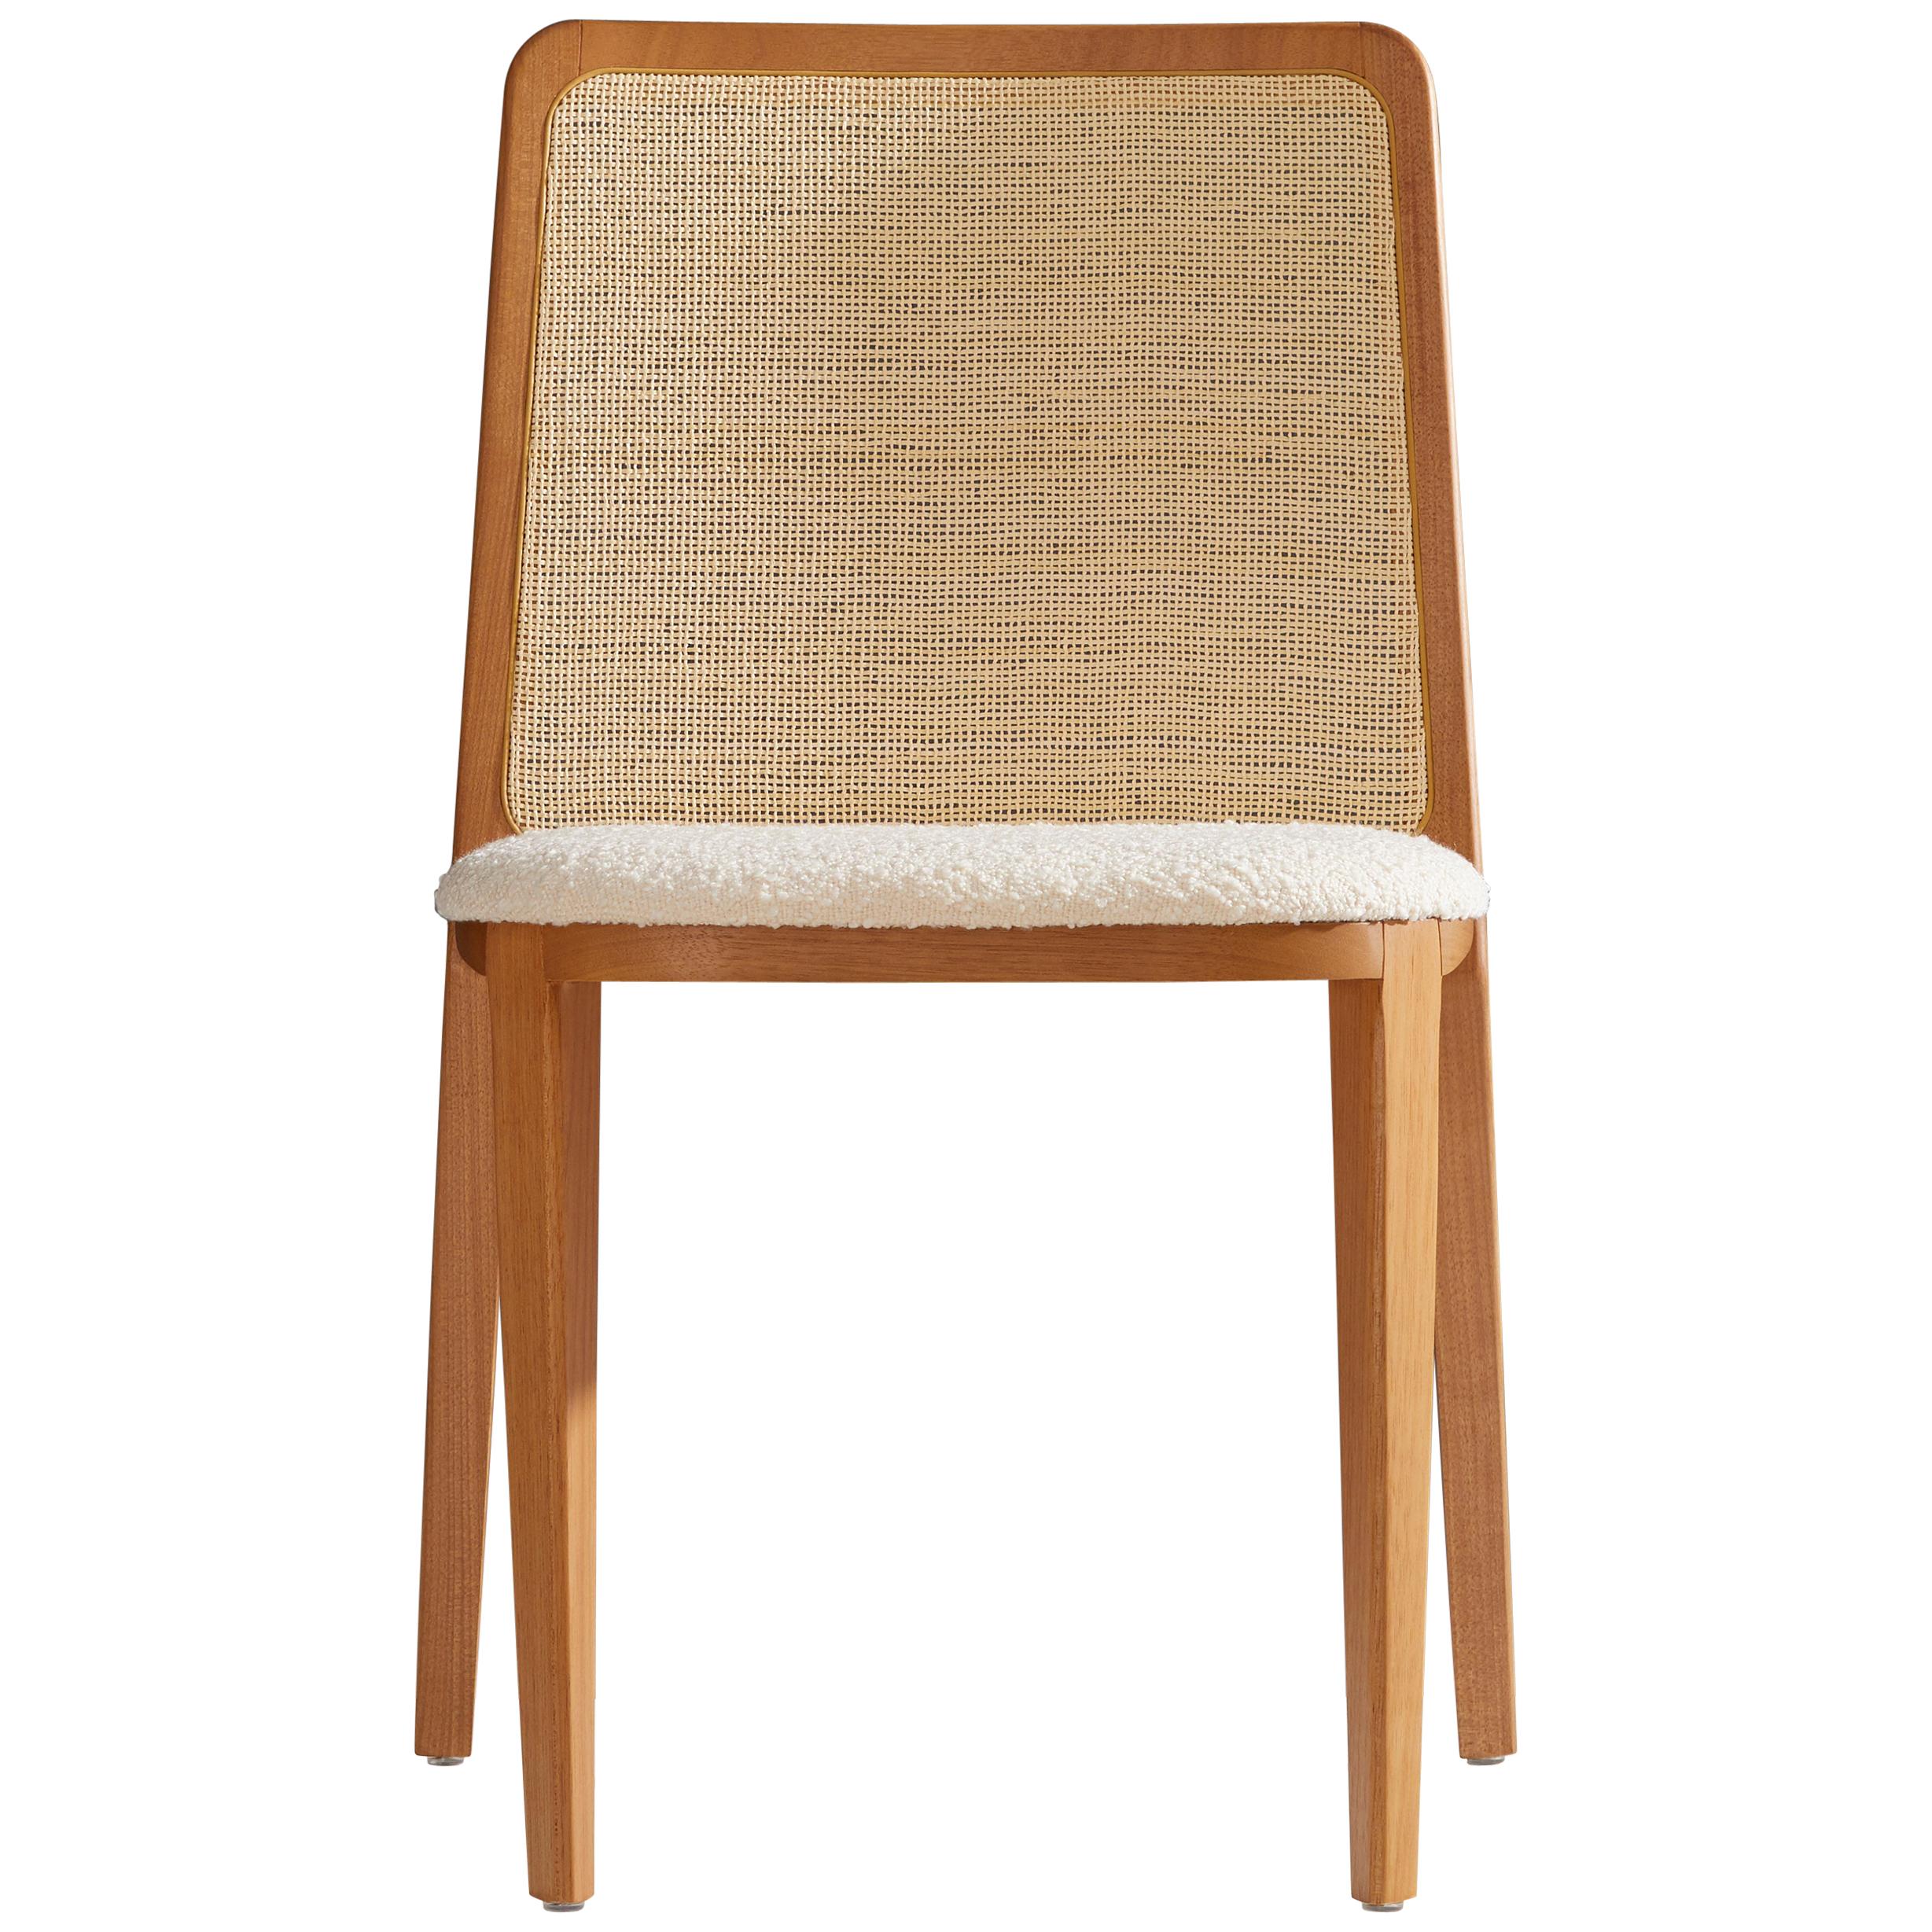 Minimal Style, Solid Wood Chair, Special Textile Seating, Caning Backboard For Sale